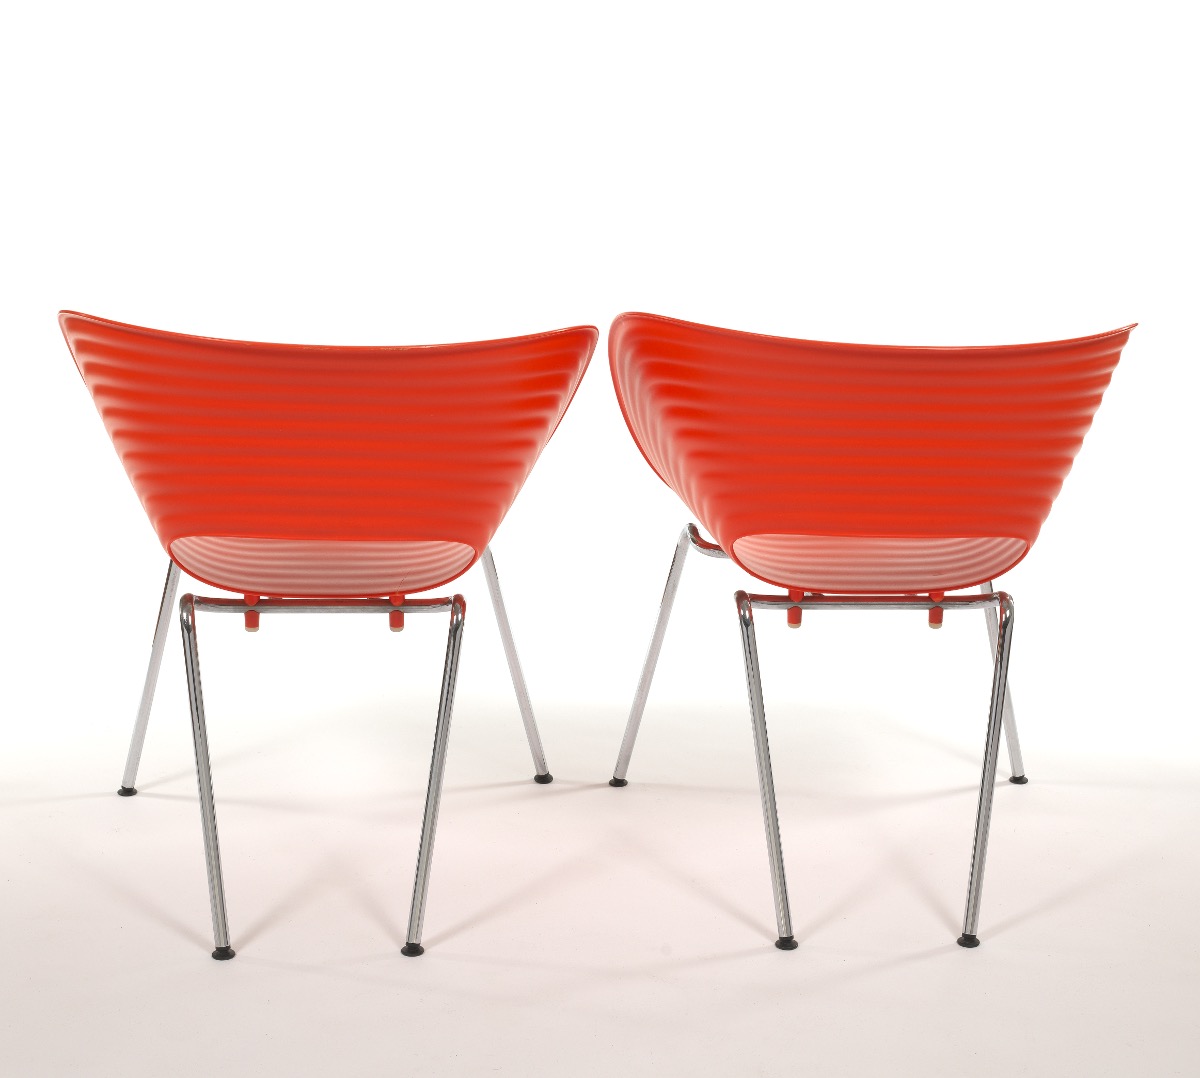 Four Ron Arad "Tom Vac" Chairs Designed for Vitra - Image 10 of 17